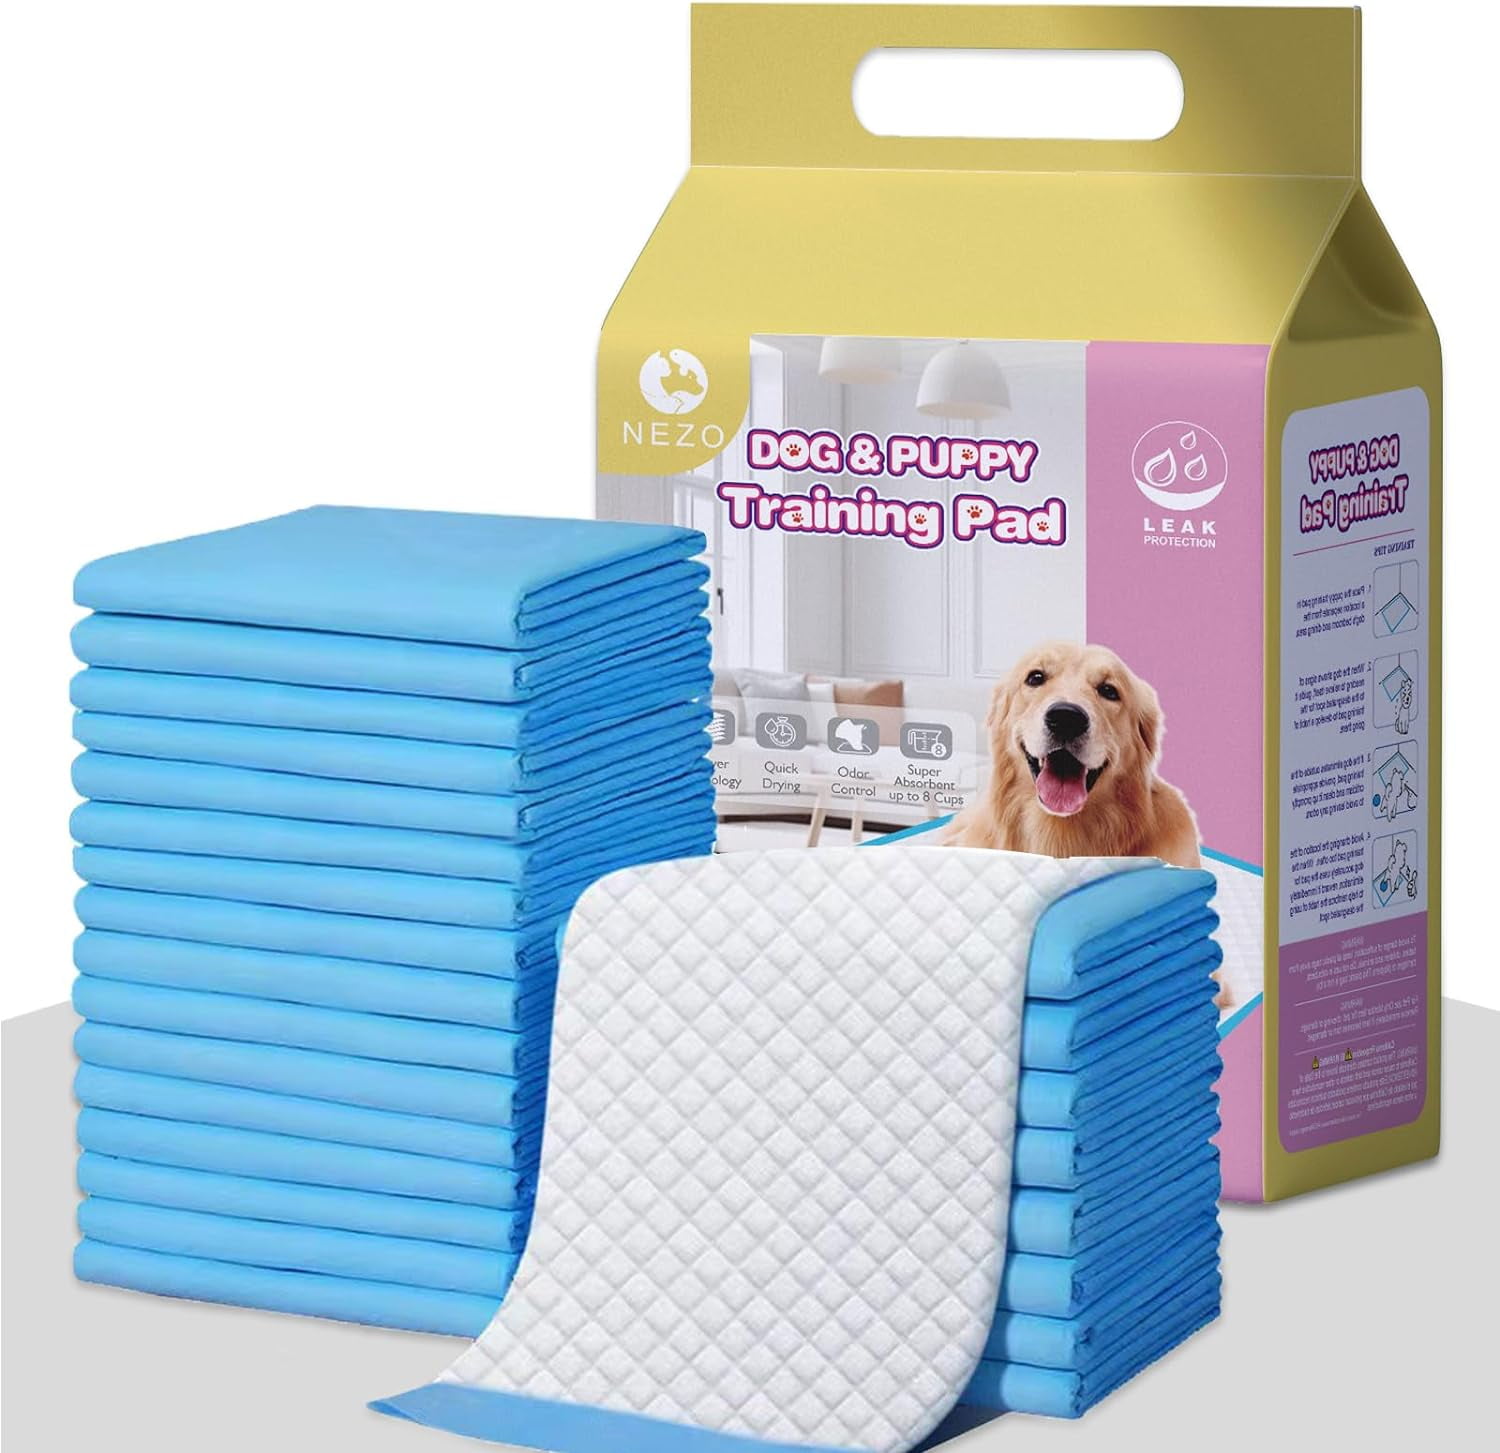 Best Water Absorbent Pads by New Pig | 20-Count | Heavy Duty | Super Absorbent | Wringable and Reusable | 15 inch x 19 inch, Size: 19 inch x 15 inch